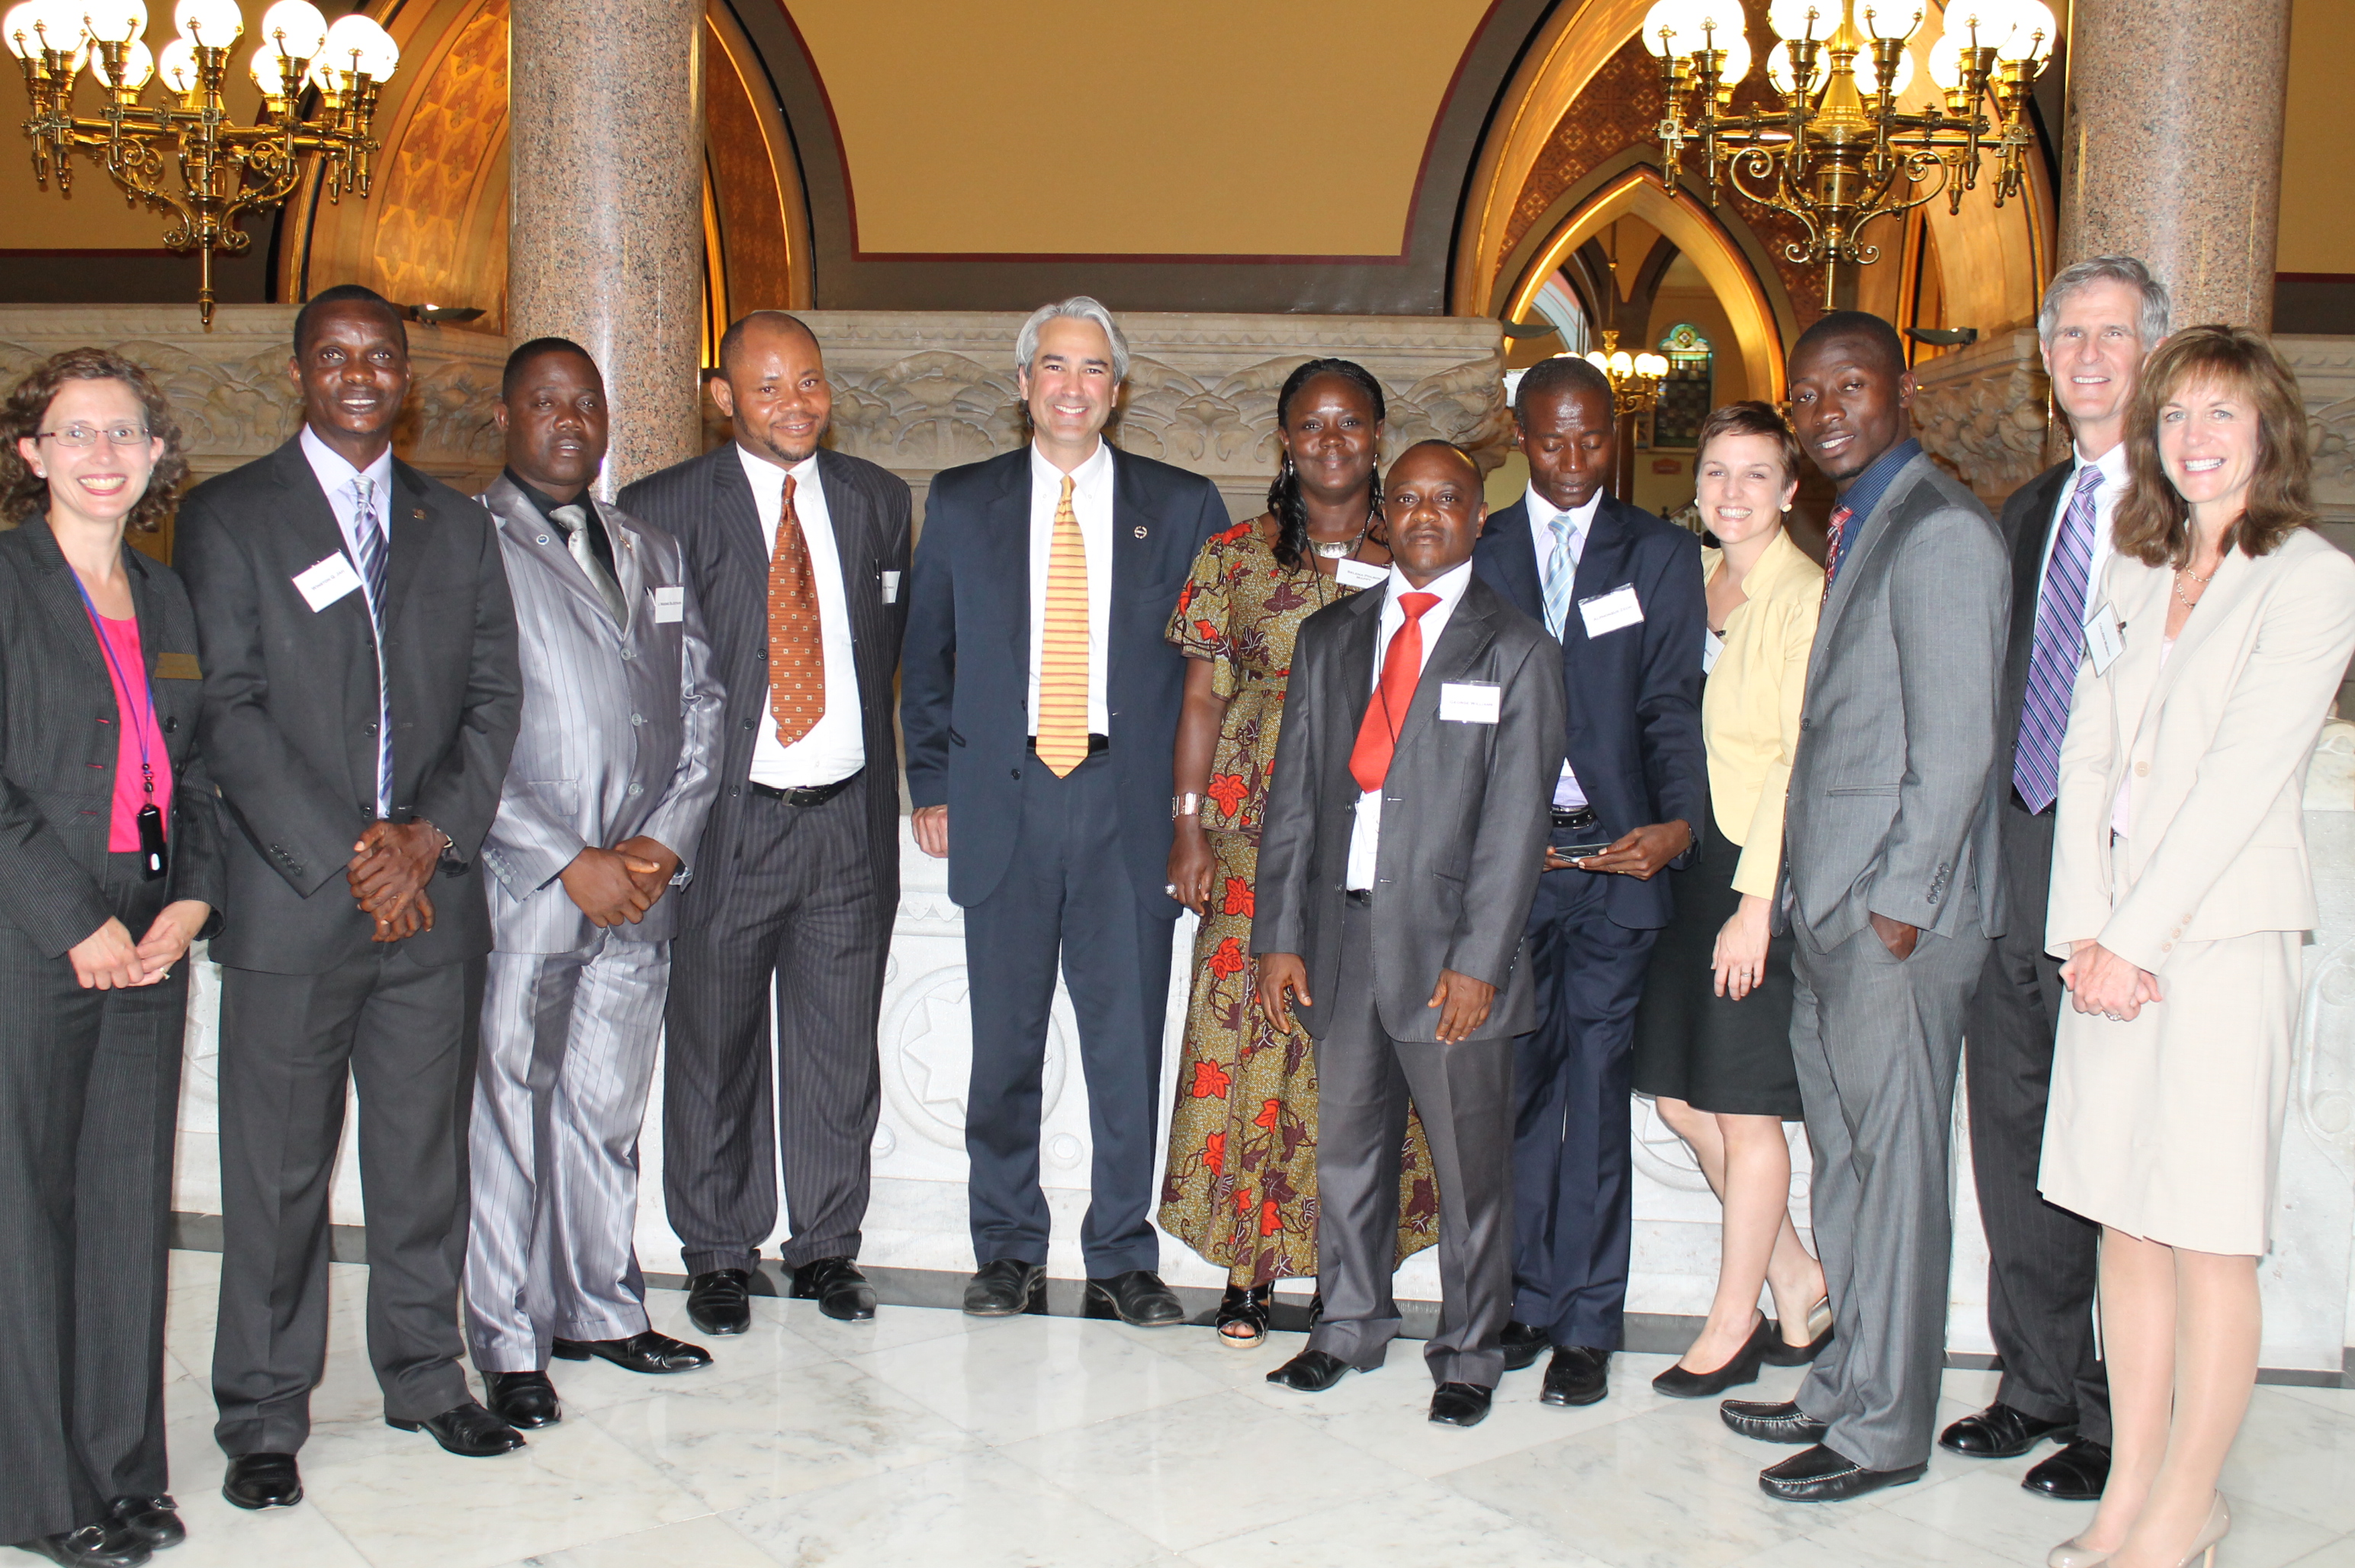 Sen. Anthony Musto (center) met with a group of Liberian government officials and representatives from the Carter Center during their visit to study Connecticut’s open government laws on June 3 -4, 2013.  Also pictured are FOIC Attorney Paula Pearlman (far left), FOI Commissioner Owen Eagan and FOIC Executive Director and General Counsel Colleen Murphy (far right).